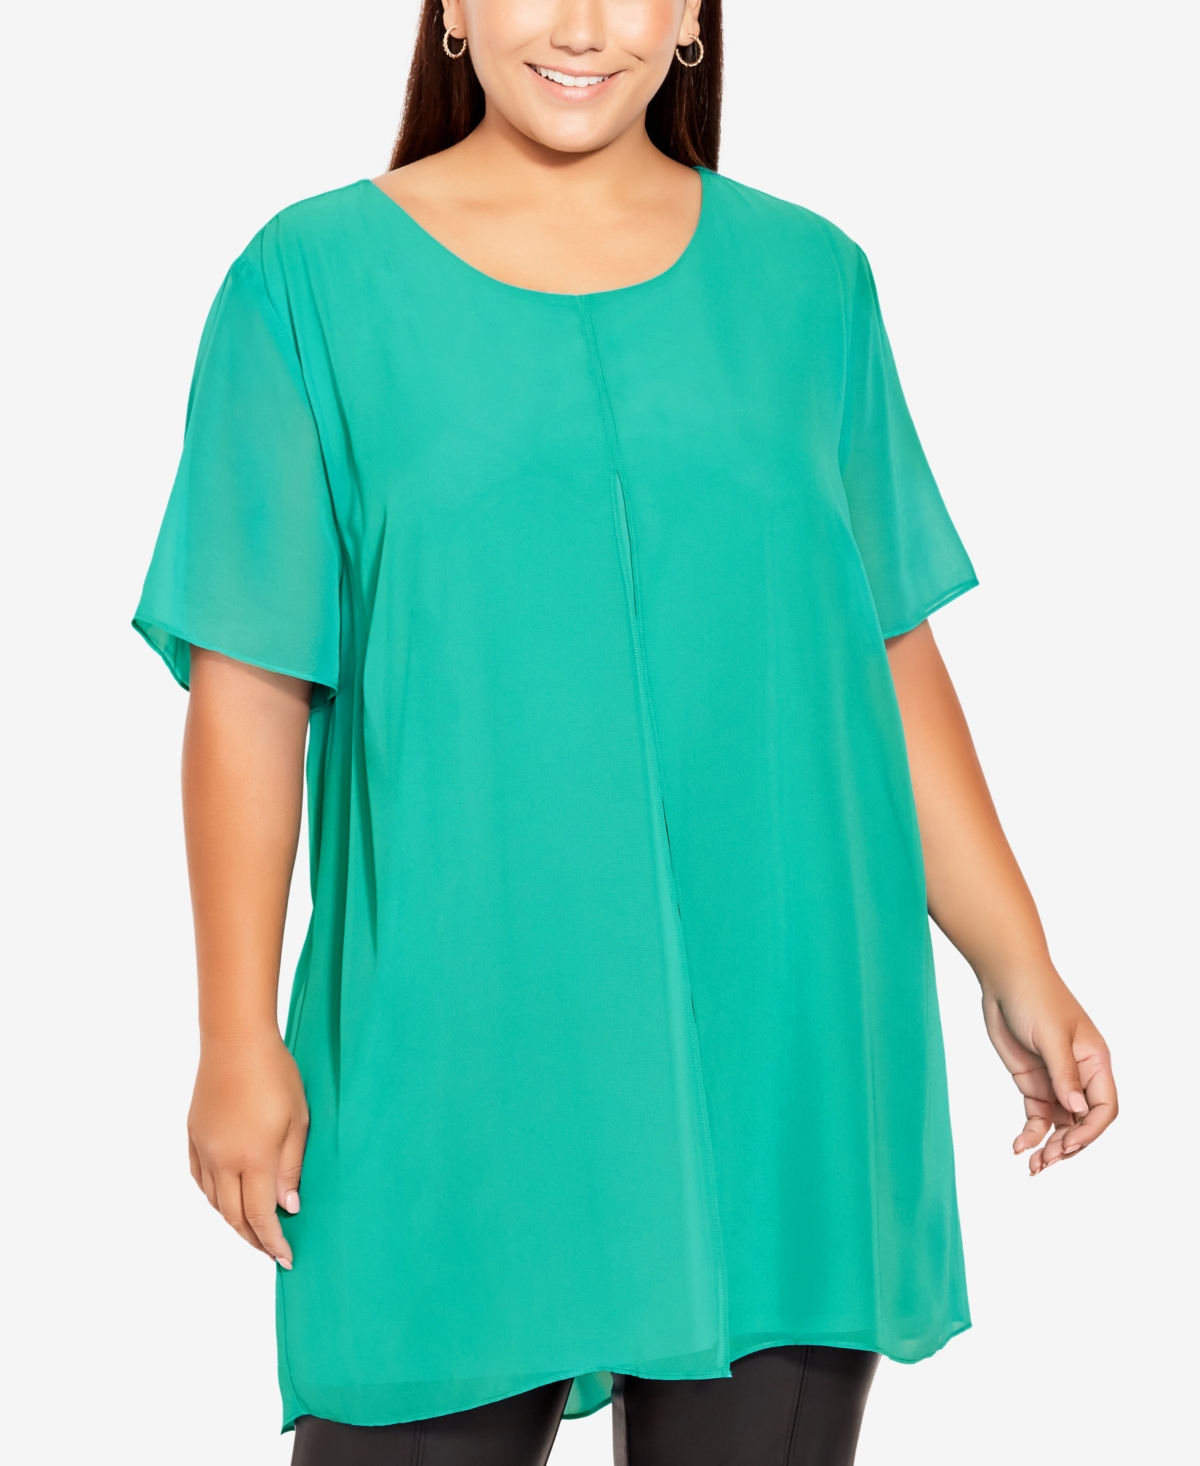 Avenue Plus Size Liv Overlay Mixed Media Scoop Neck Top In Turquoise